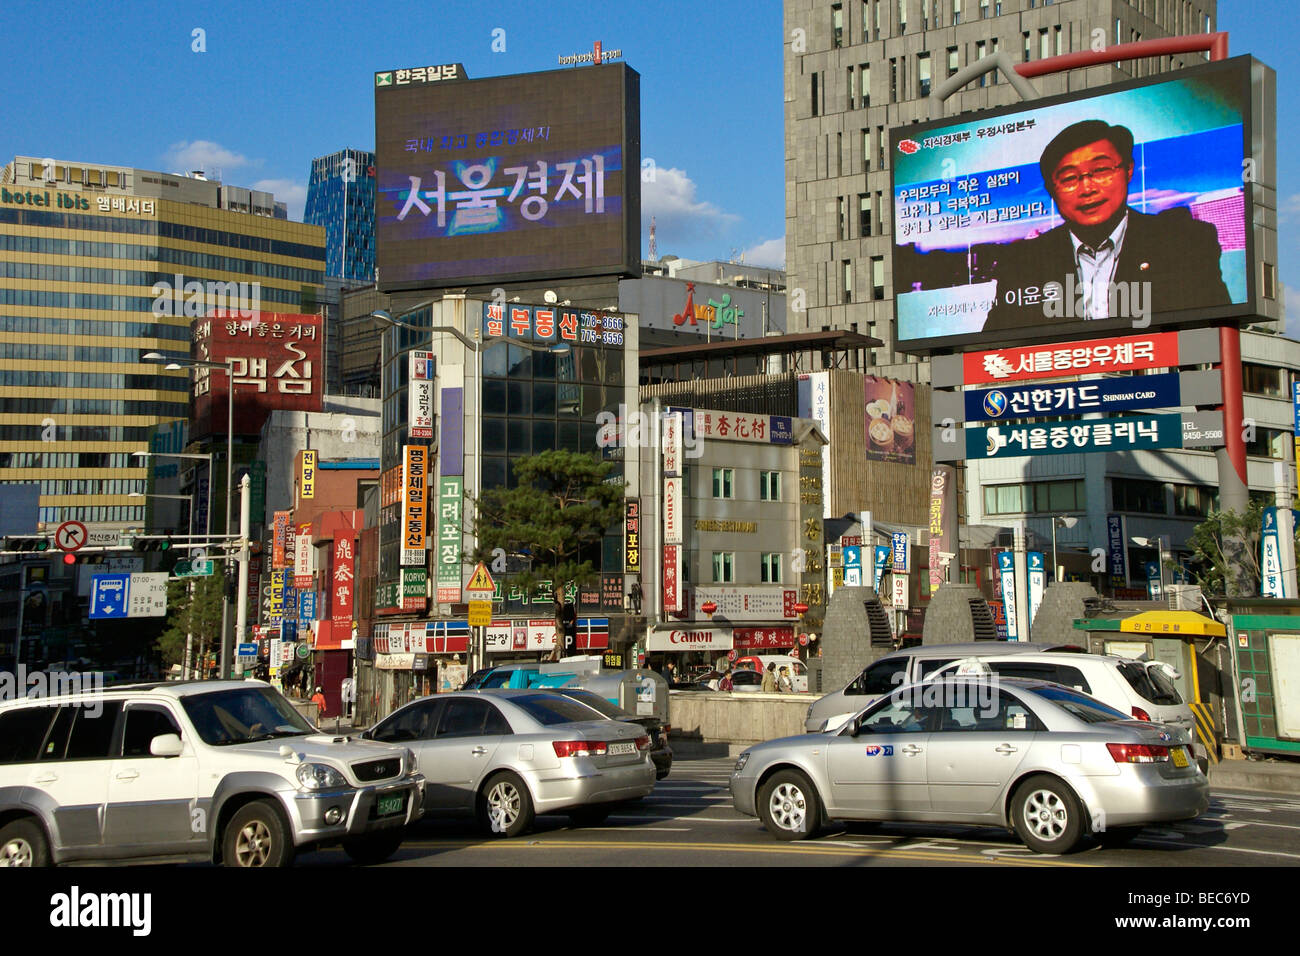 Busy street with electronic advertising, Seoul, South Korea Stock Photo